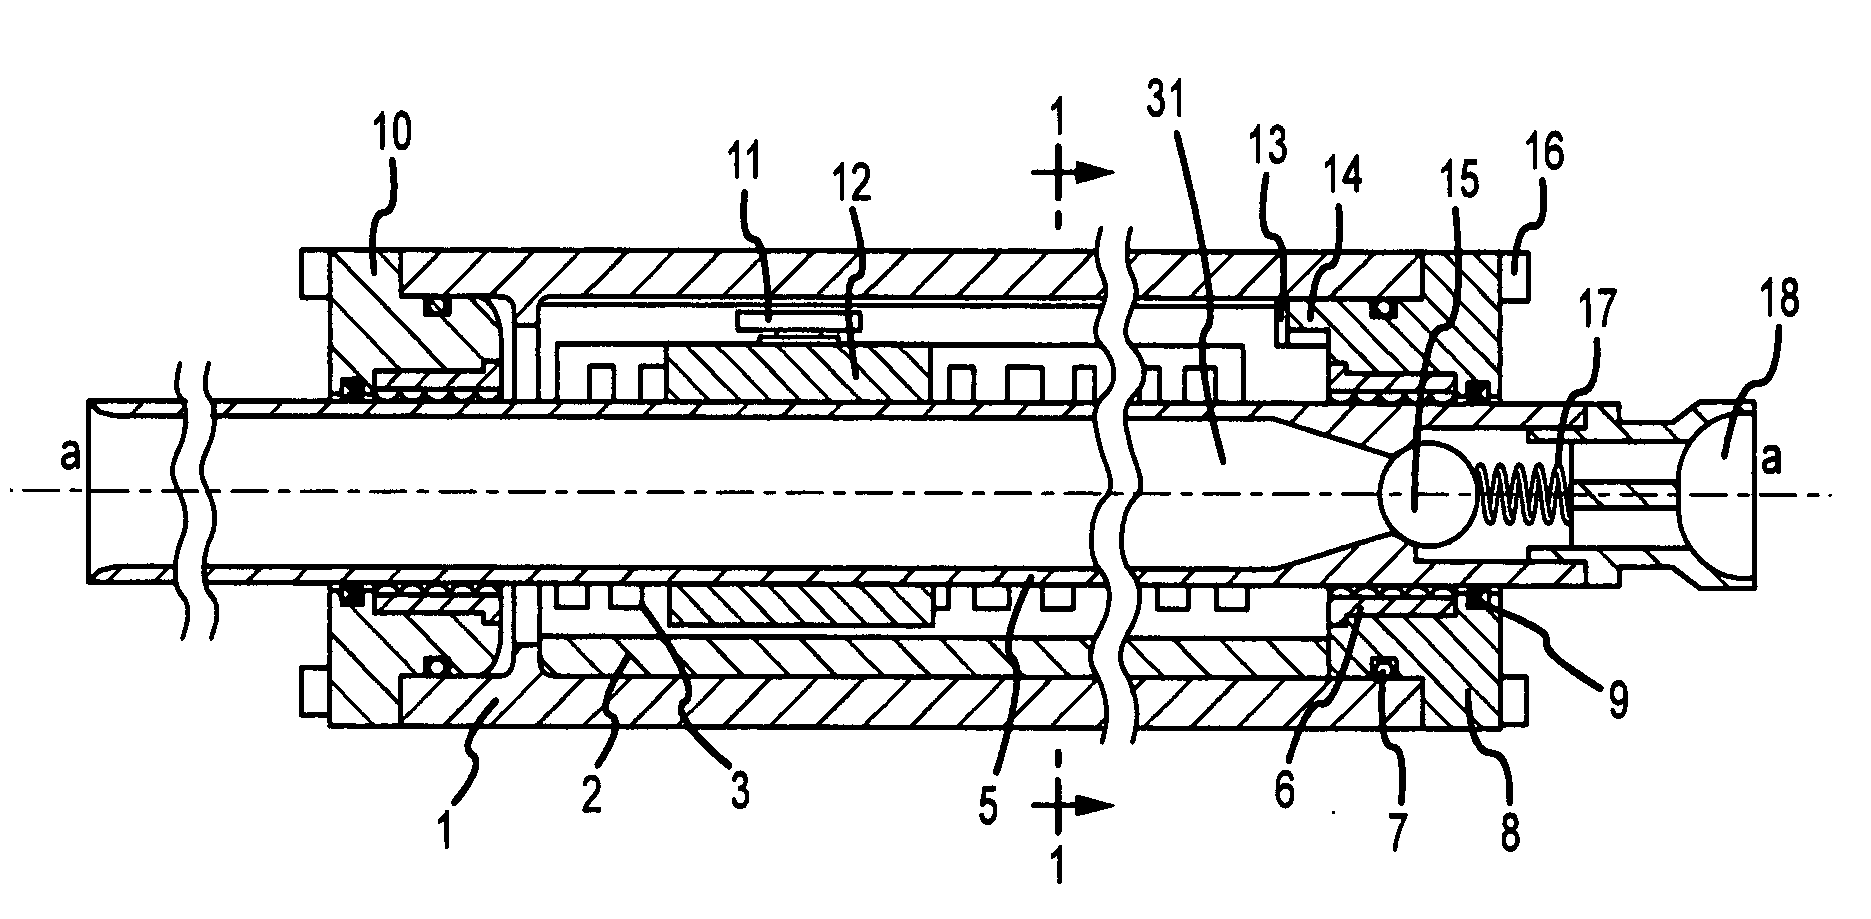 Electrical linear motor for propulsion of marine vessel